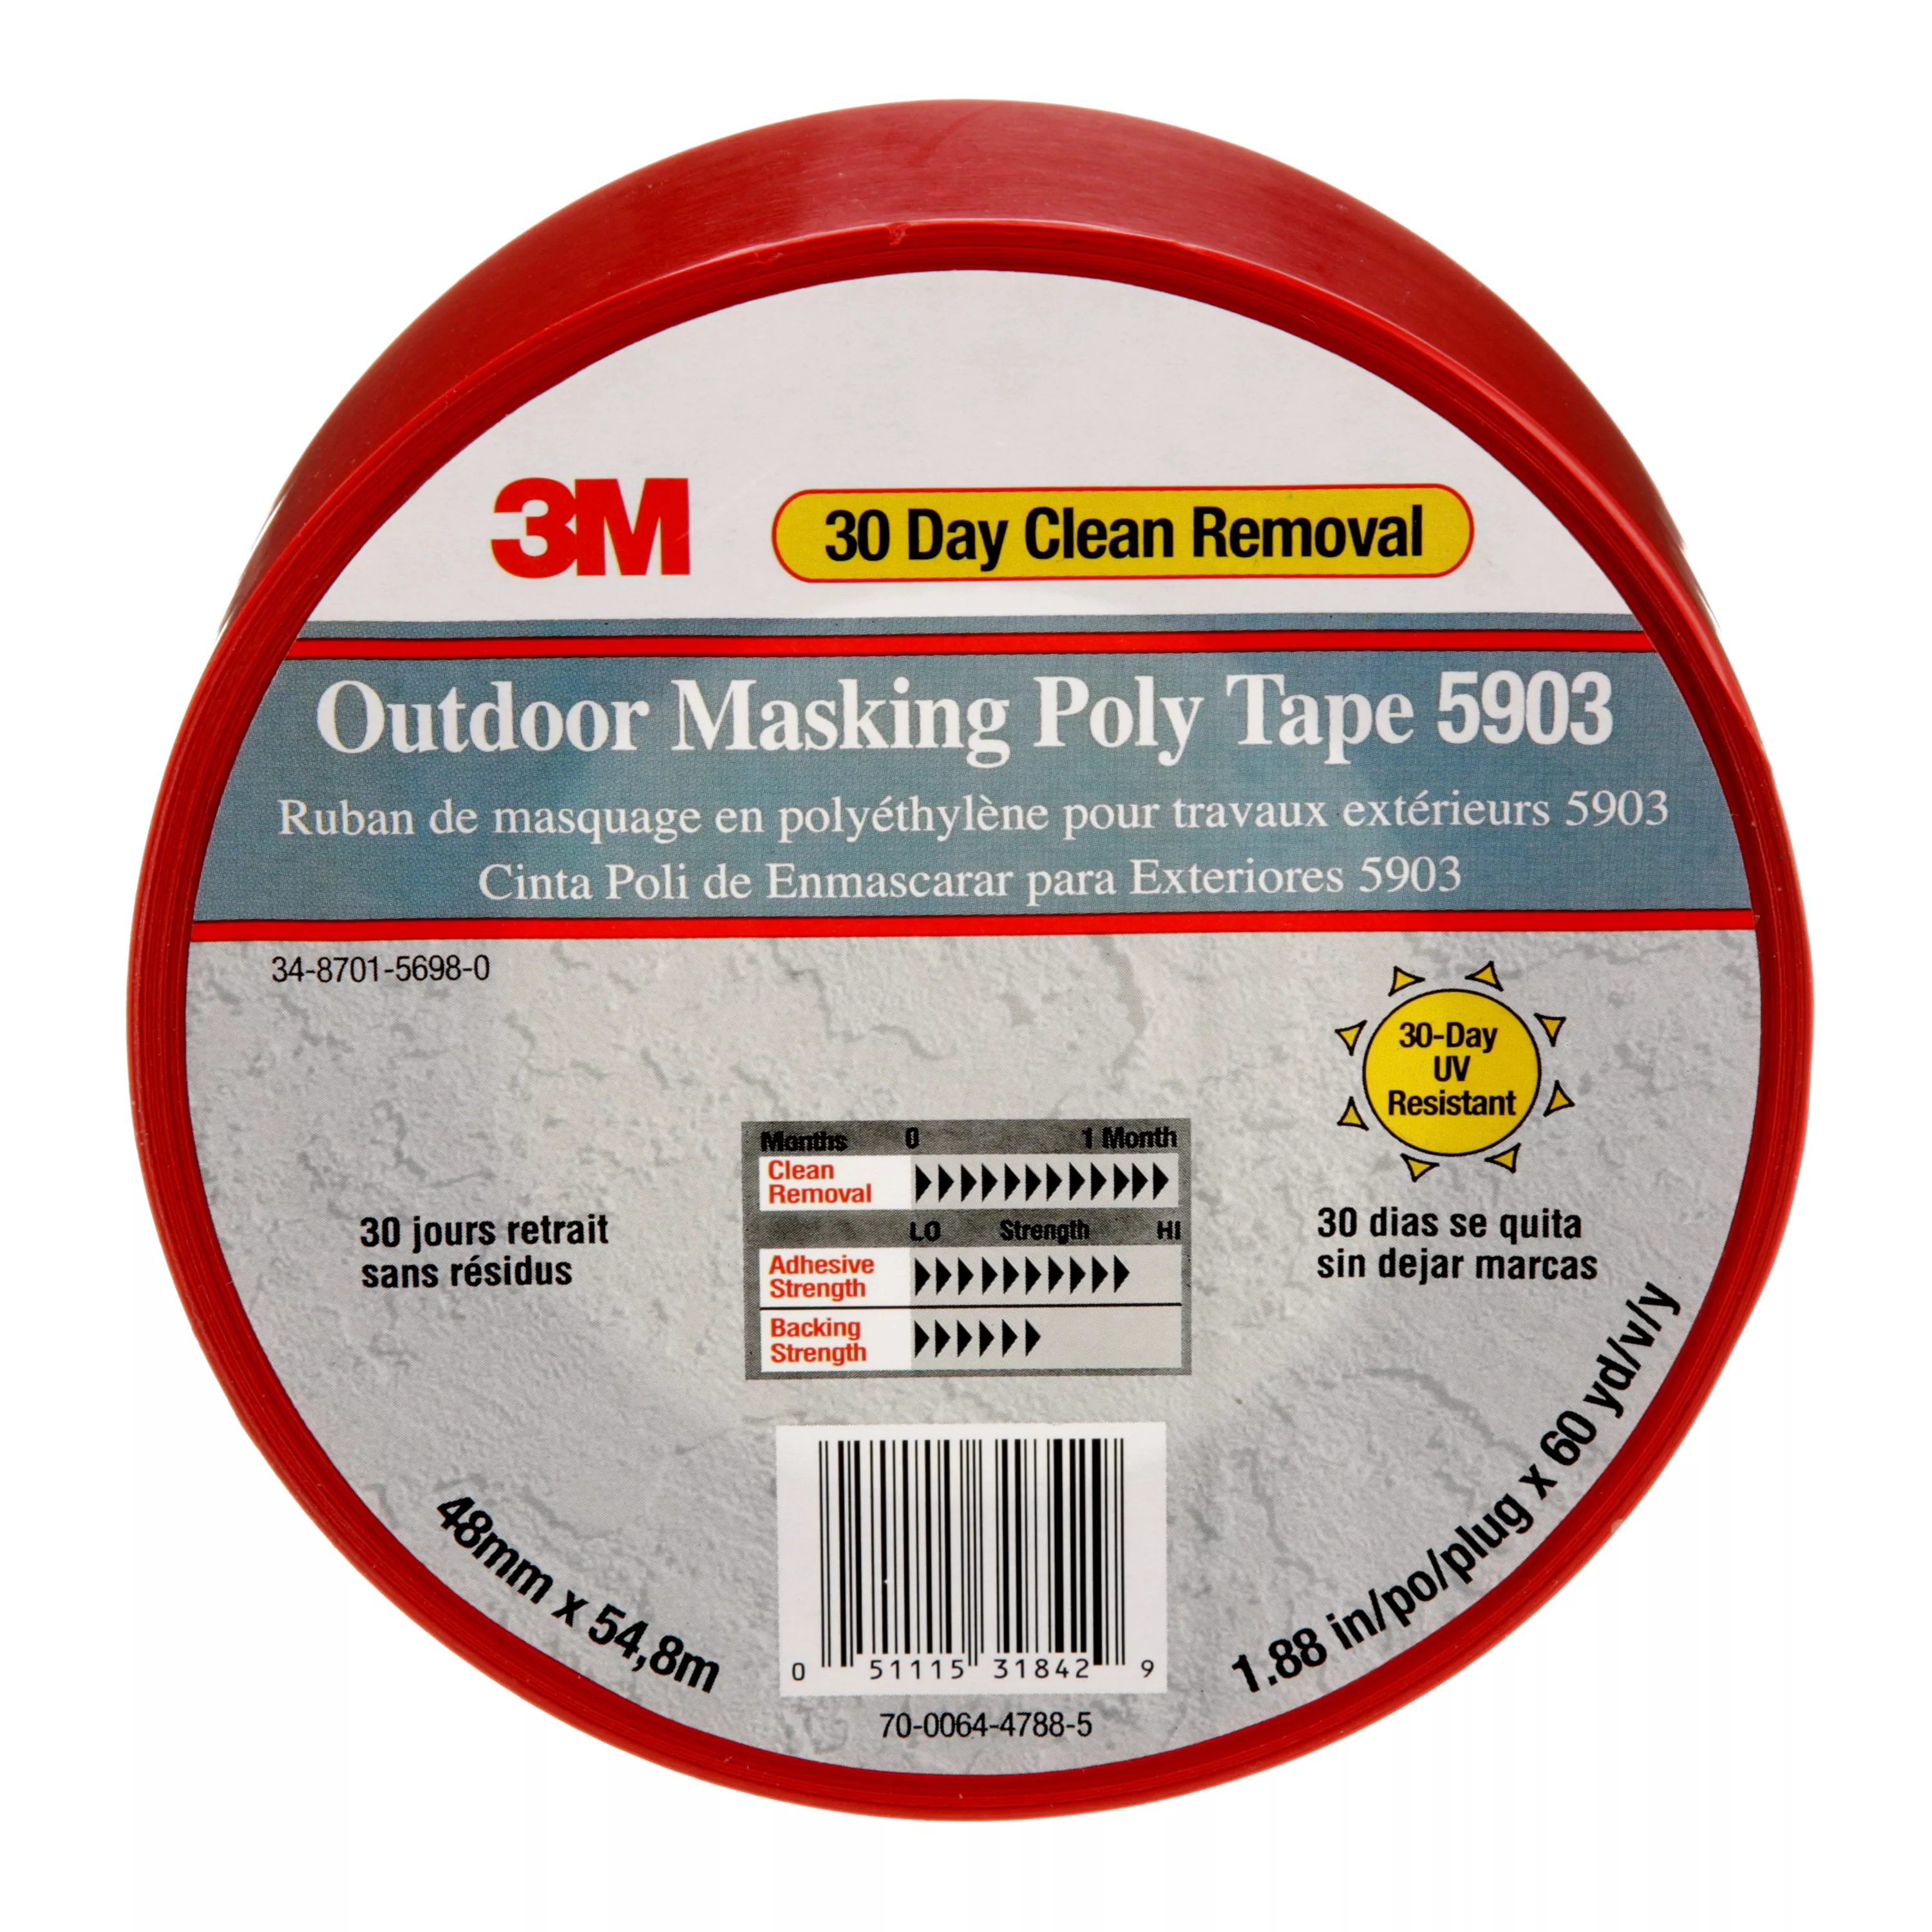 3M™ Outdoor Masking Poly Tape 5903, Red, 48 mm x 54.8 m, 7.5 mil, 24
Roll/Case, Individually Wrapped Conveniently Packaged